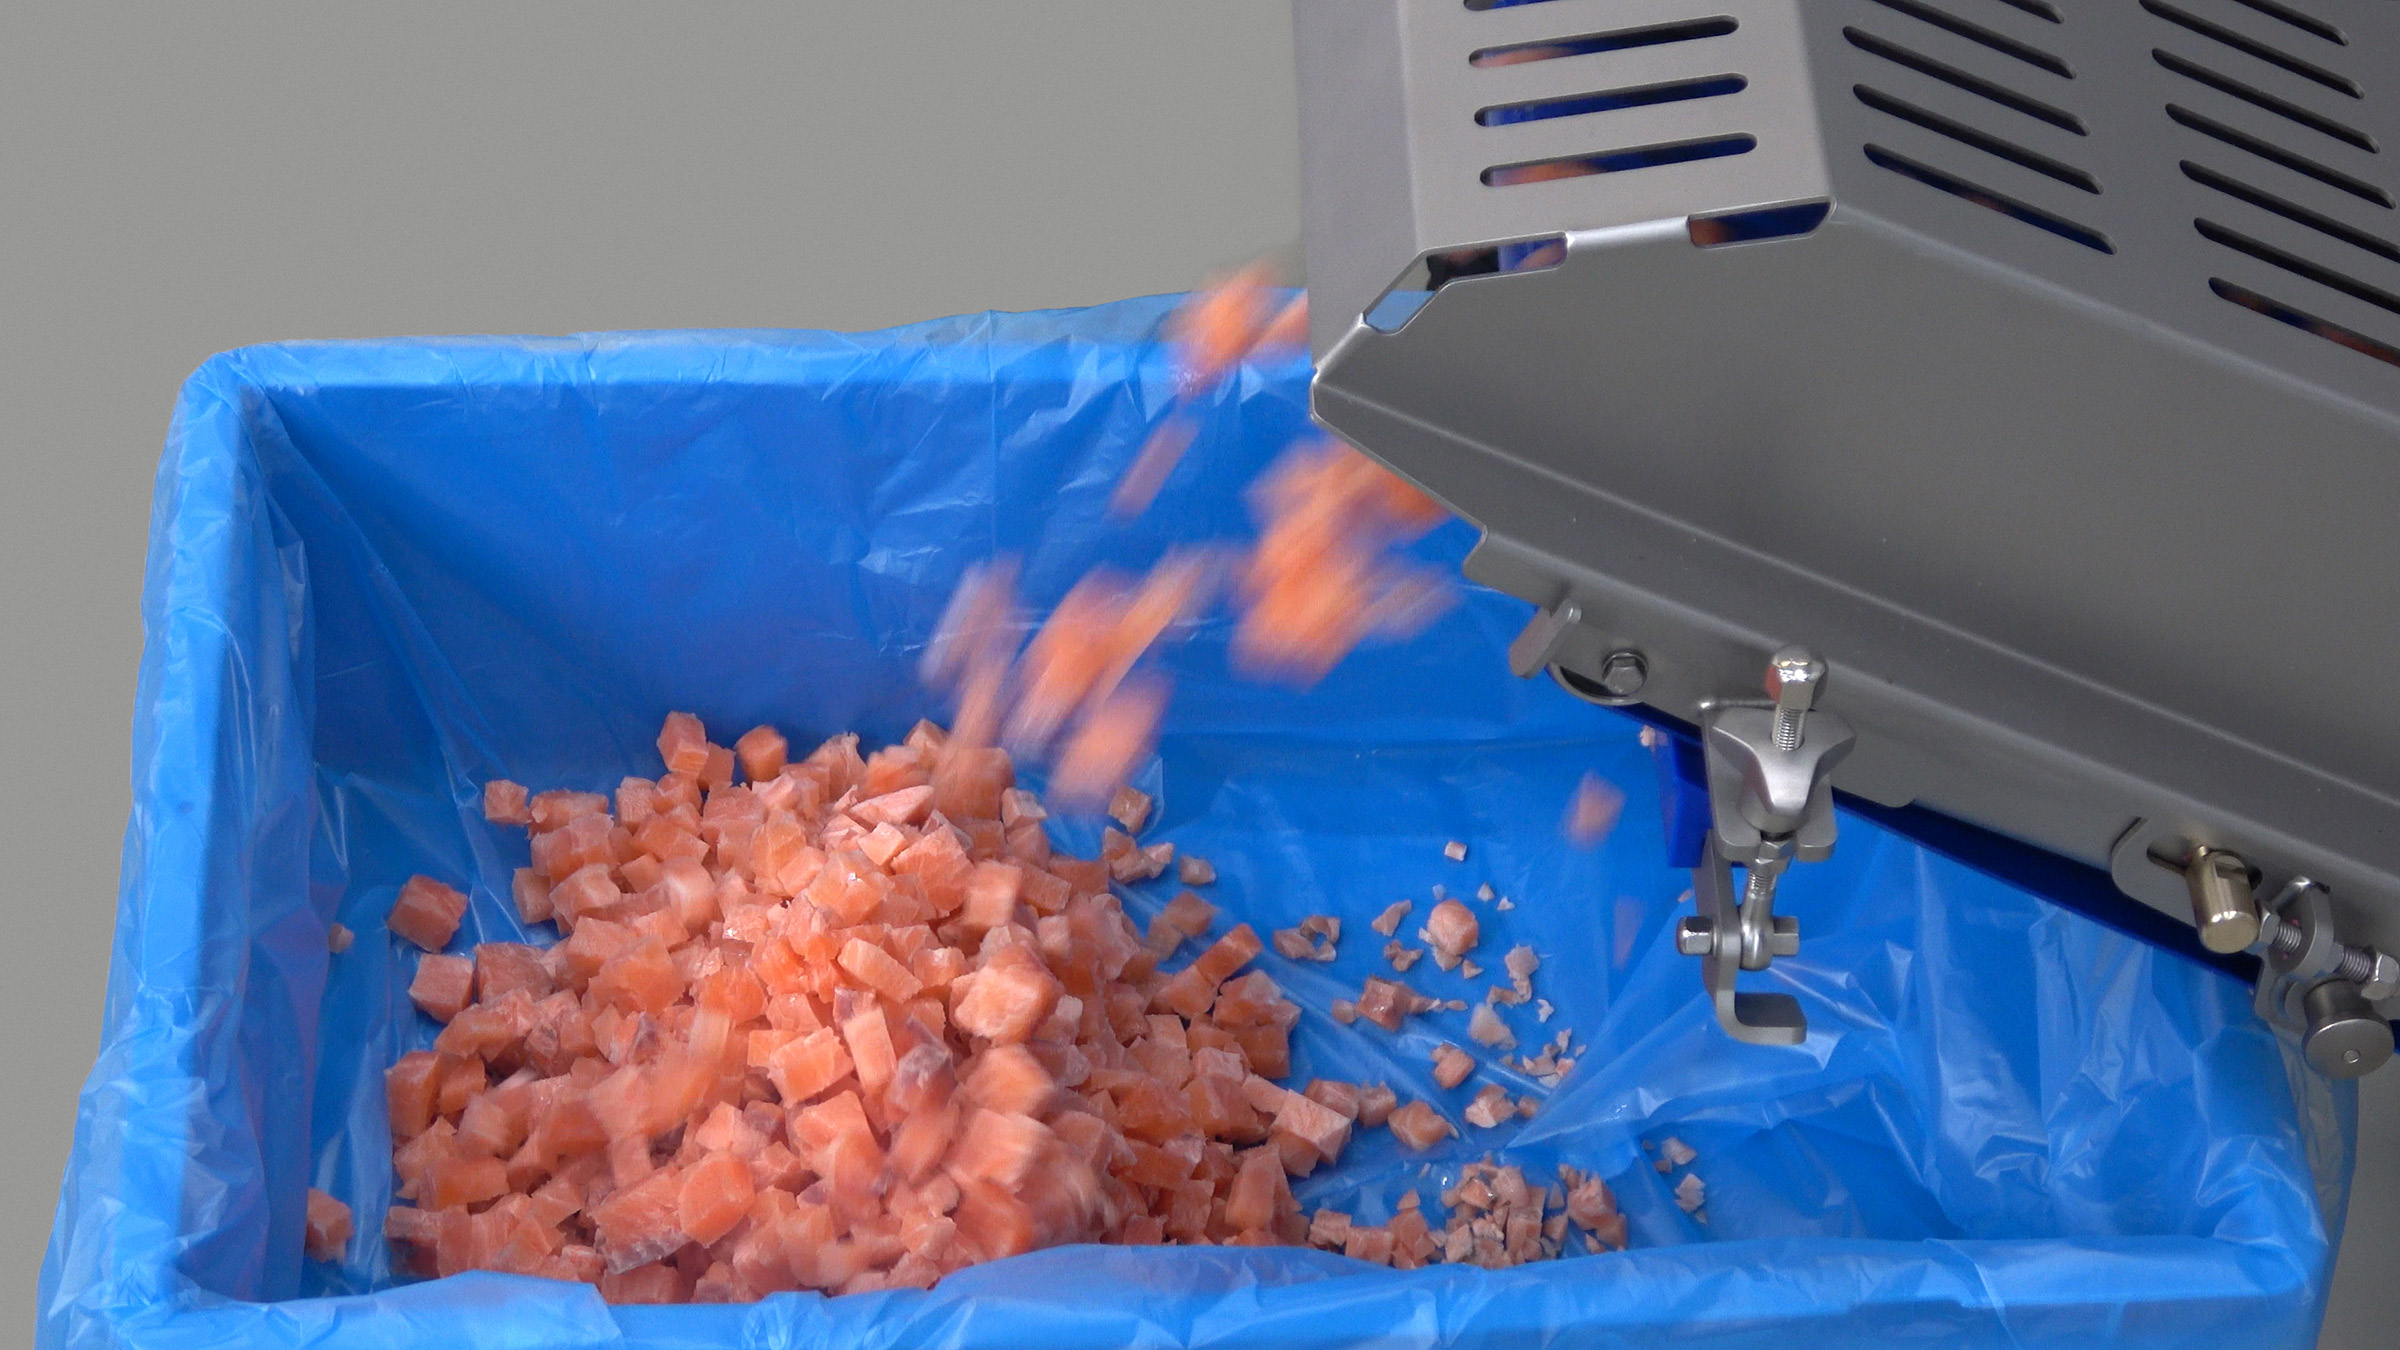 TREIF Dicing Fish Salmon Outfeed